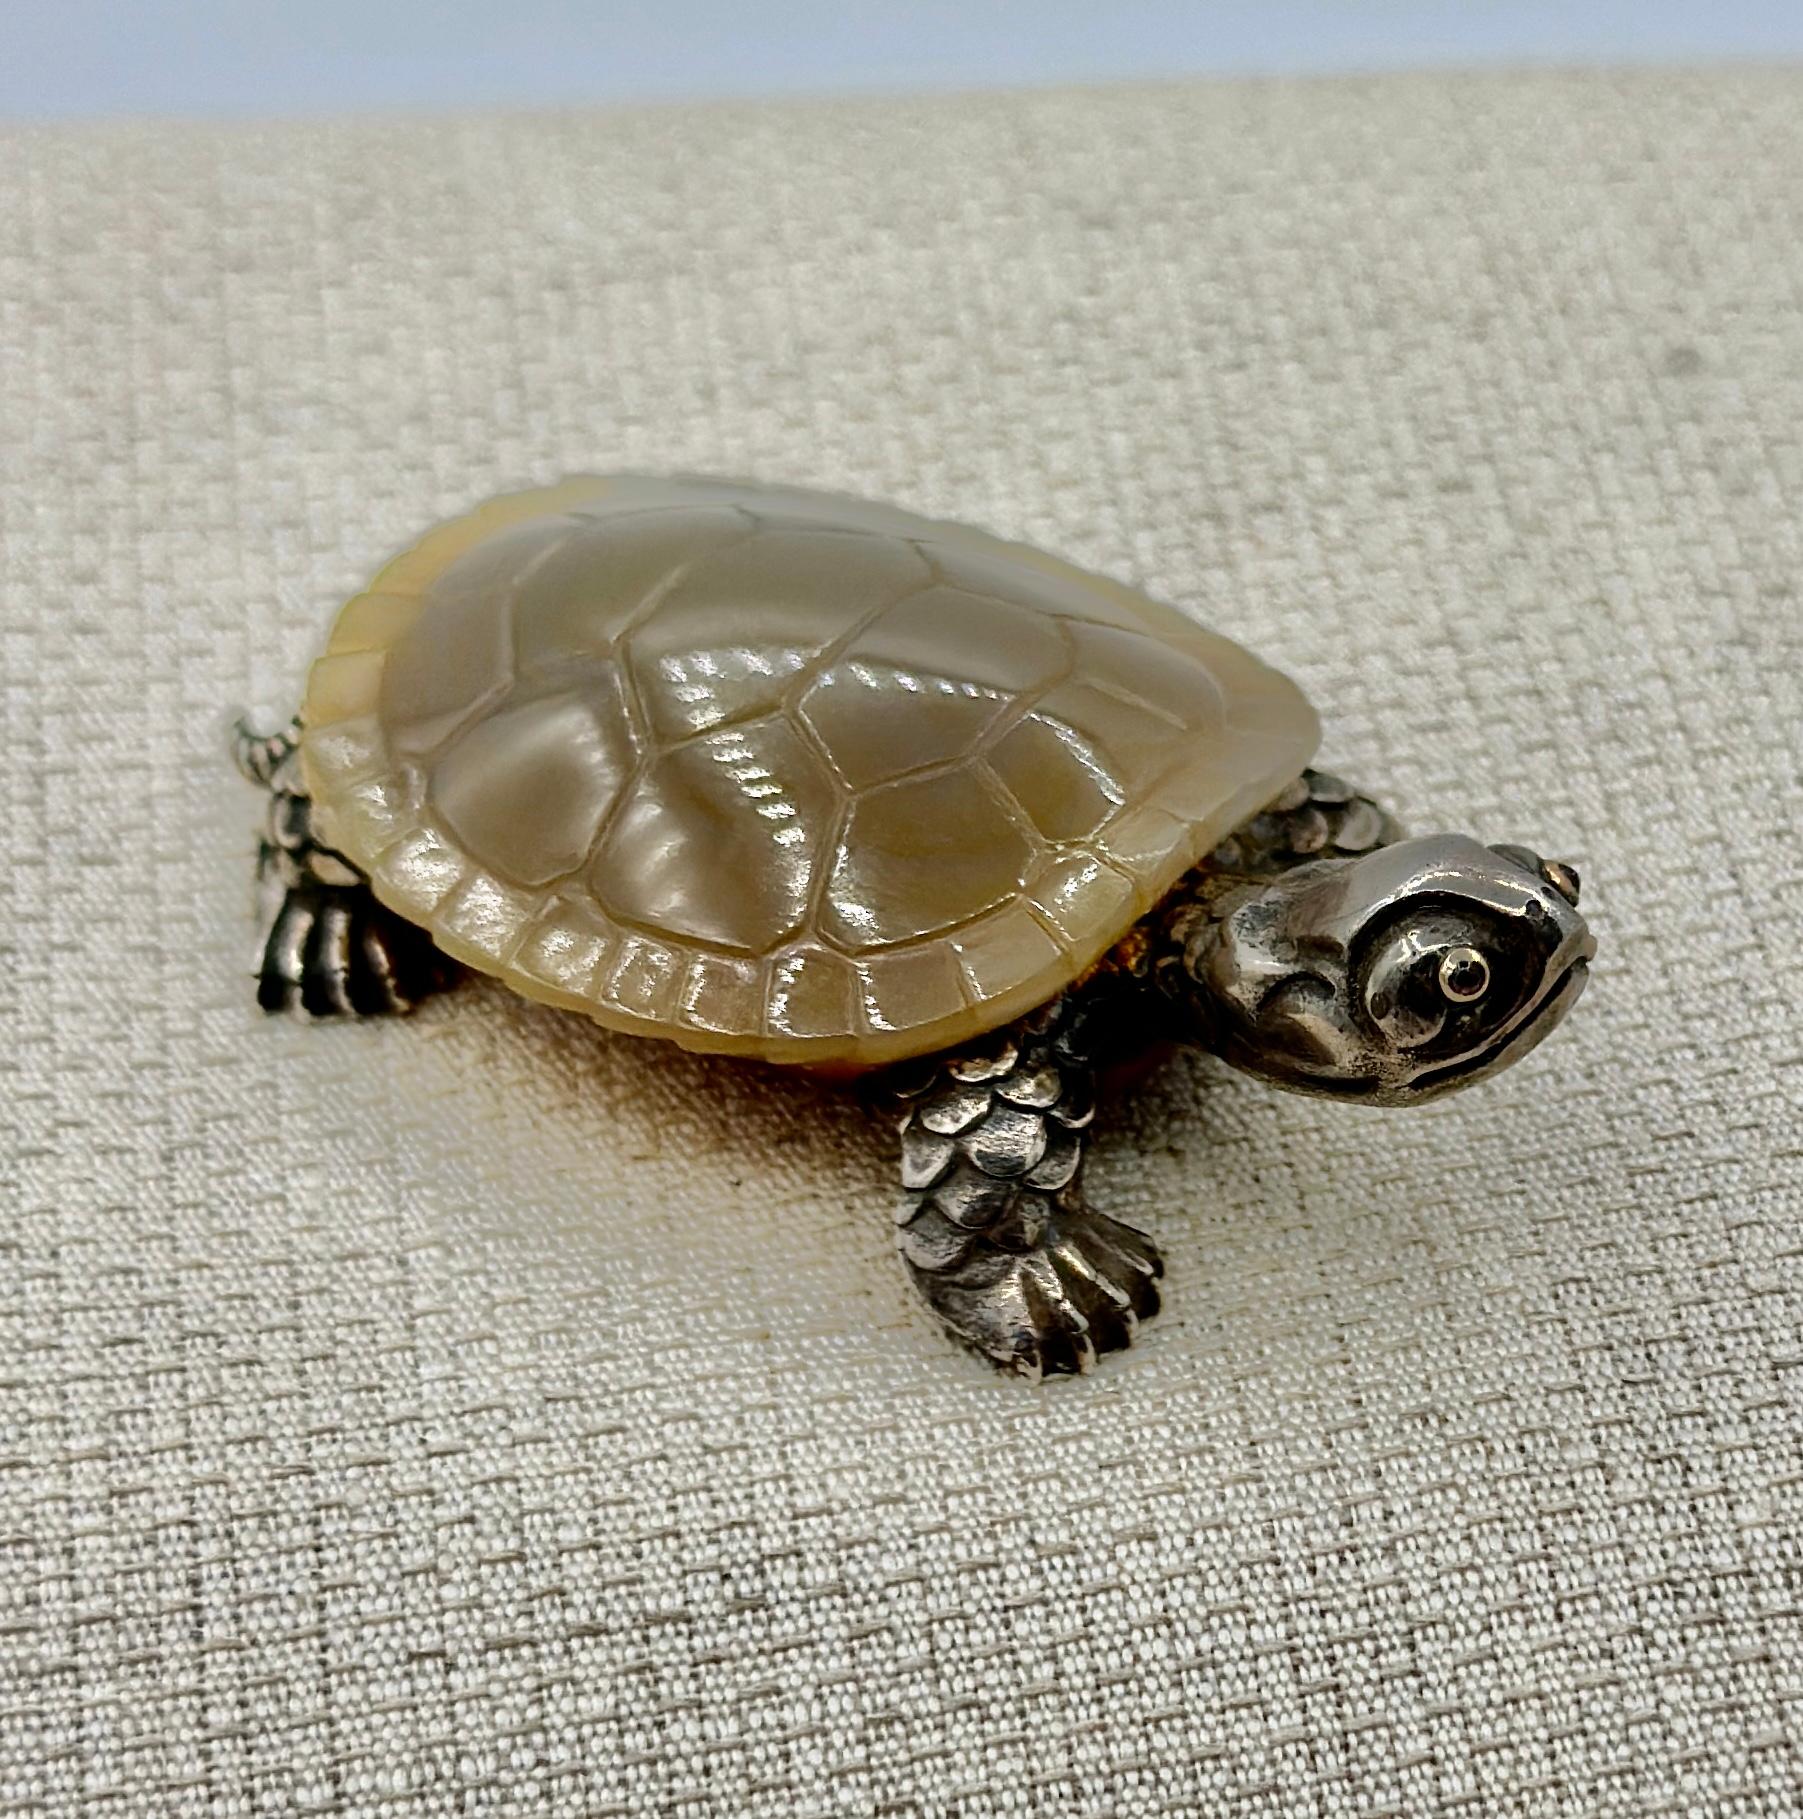 Faberge Ruby Agate Turtle Julius Rappoport Workmaster .875 Silver Tortoise 1910 For Sale 1